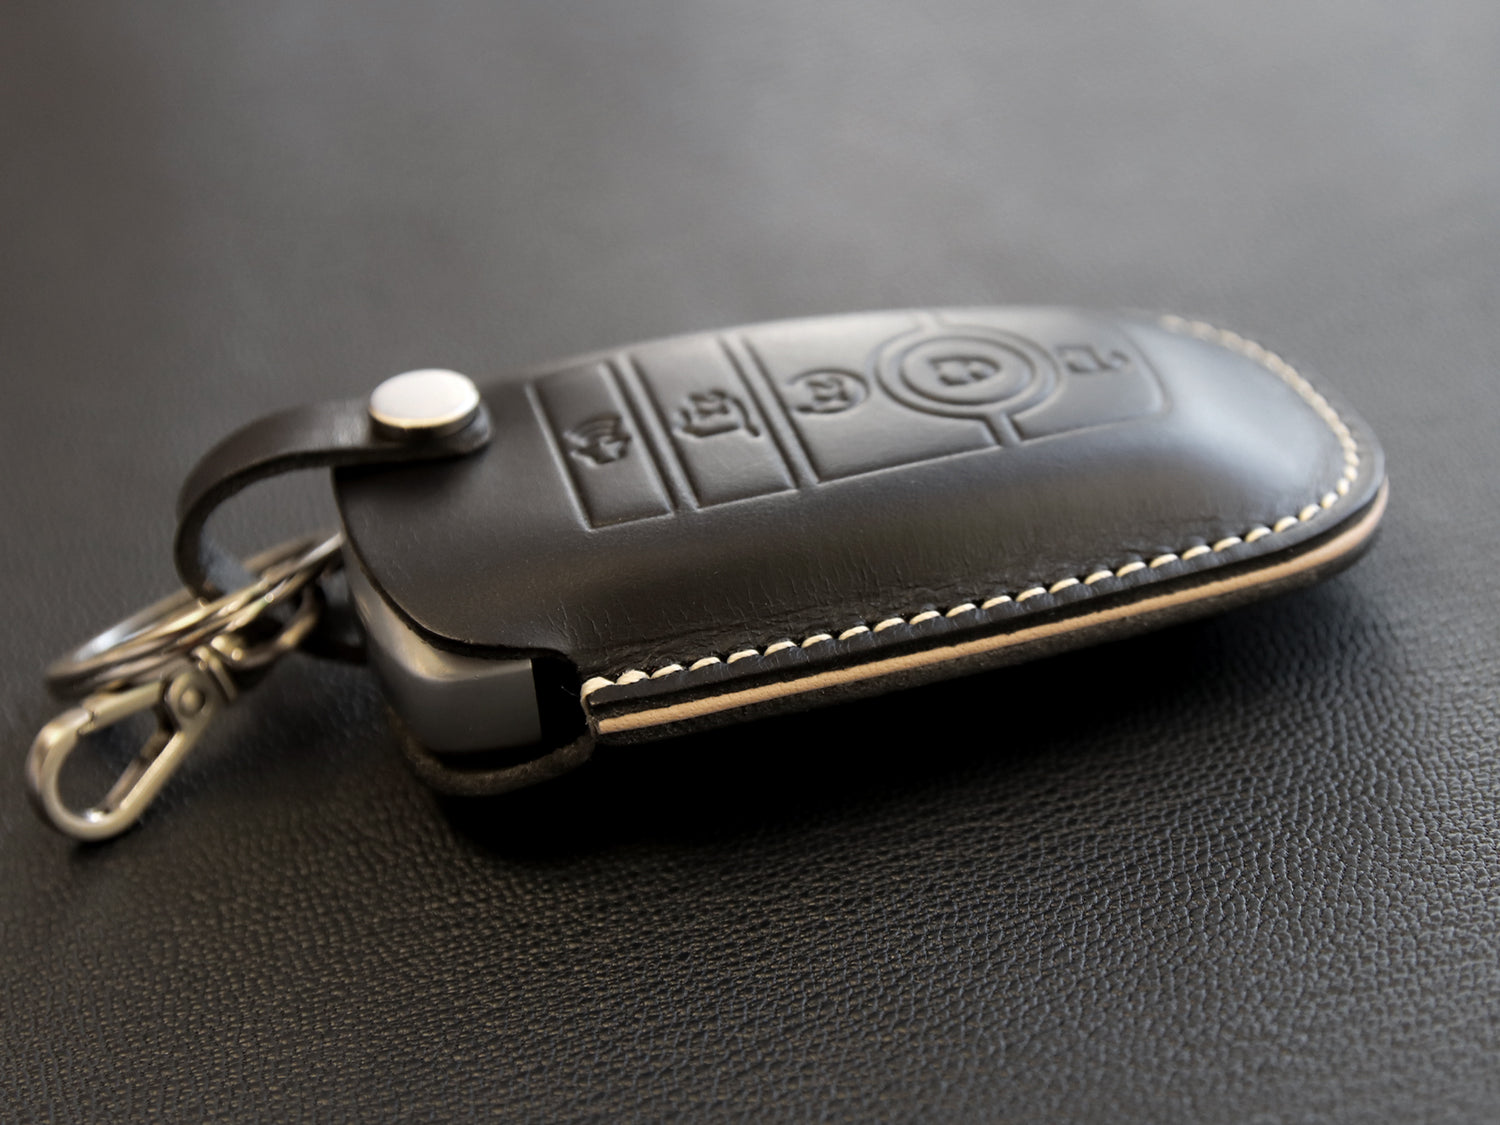 Ford Series [2] Key Case Leather Key Fob Cover Bronco Fusion Edge Mustang Leather Car Accessory Personalized Stamp Handcrafted in USA